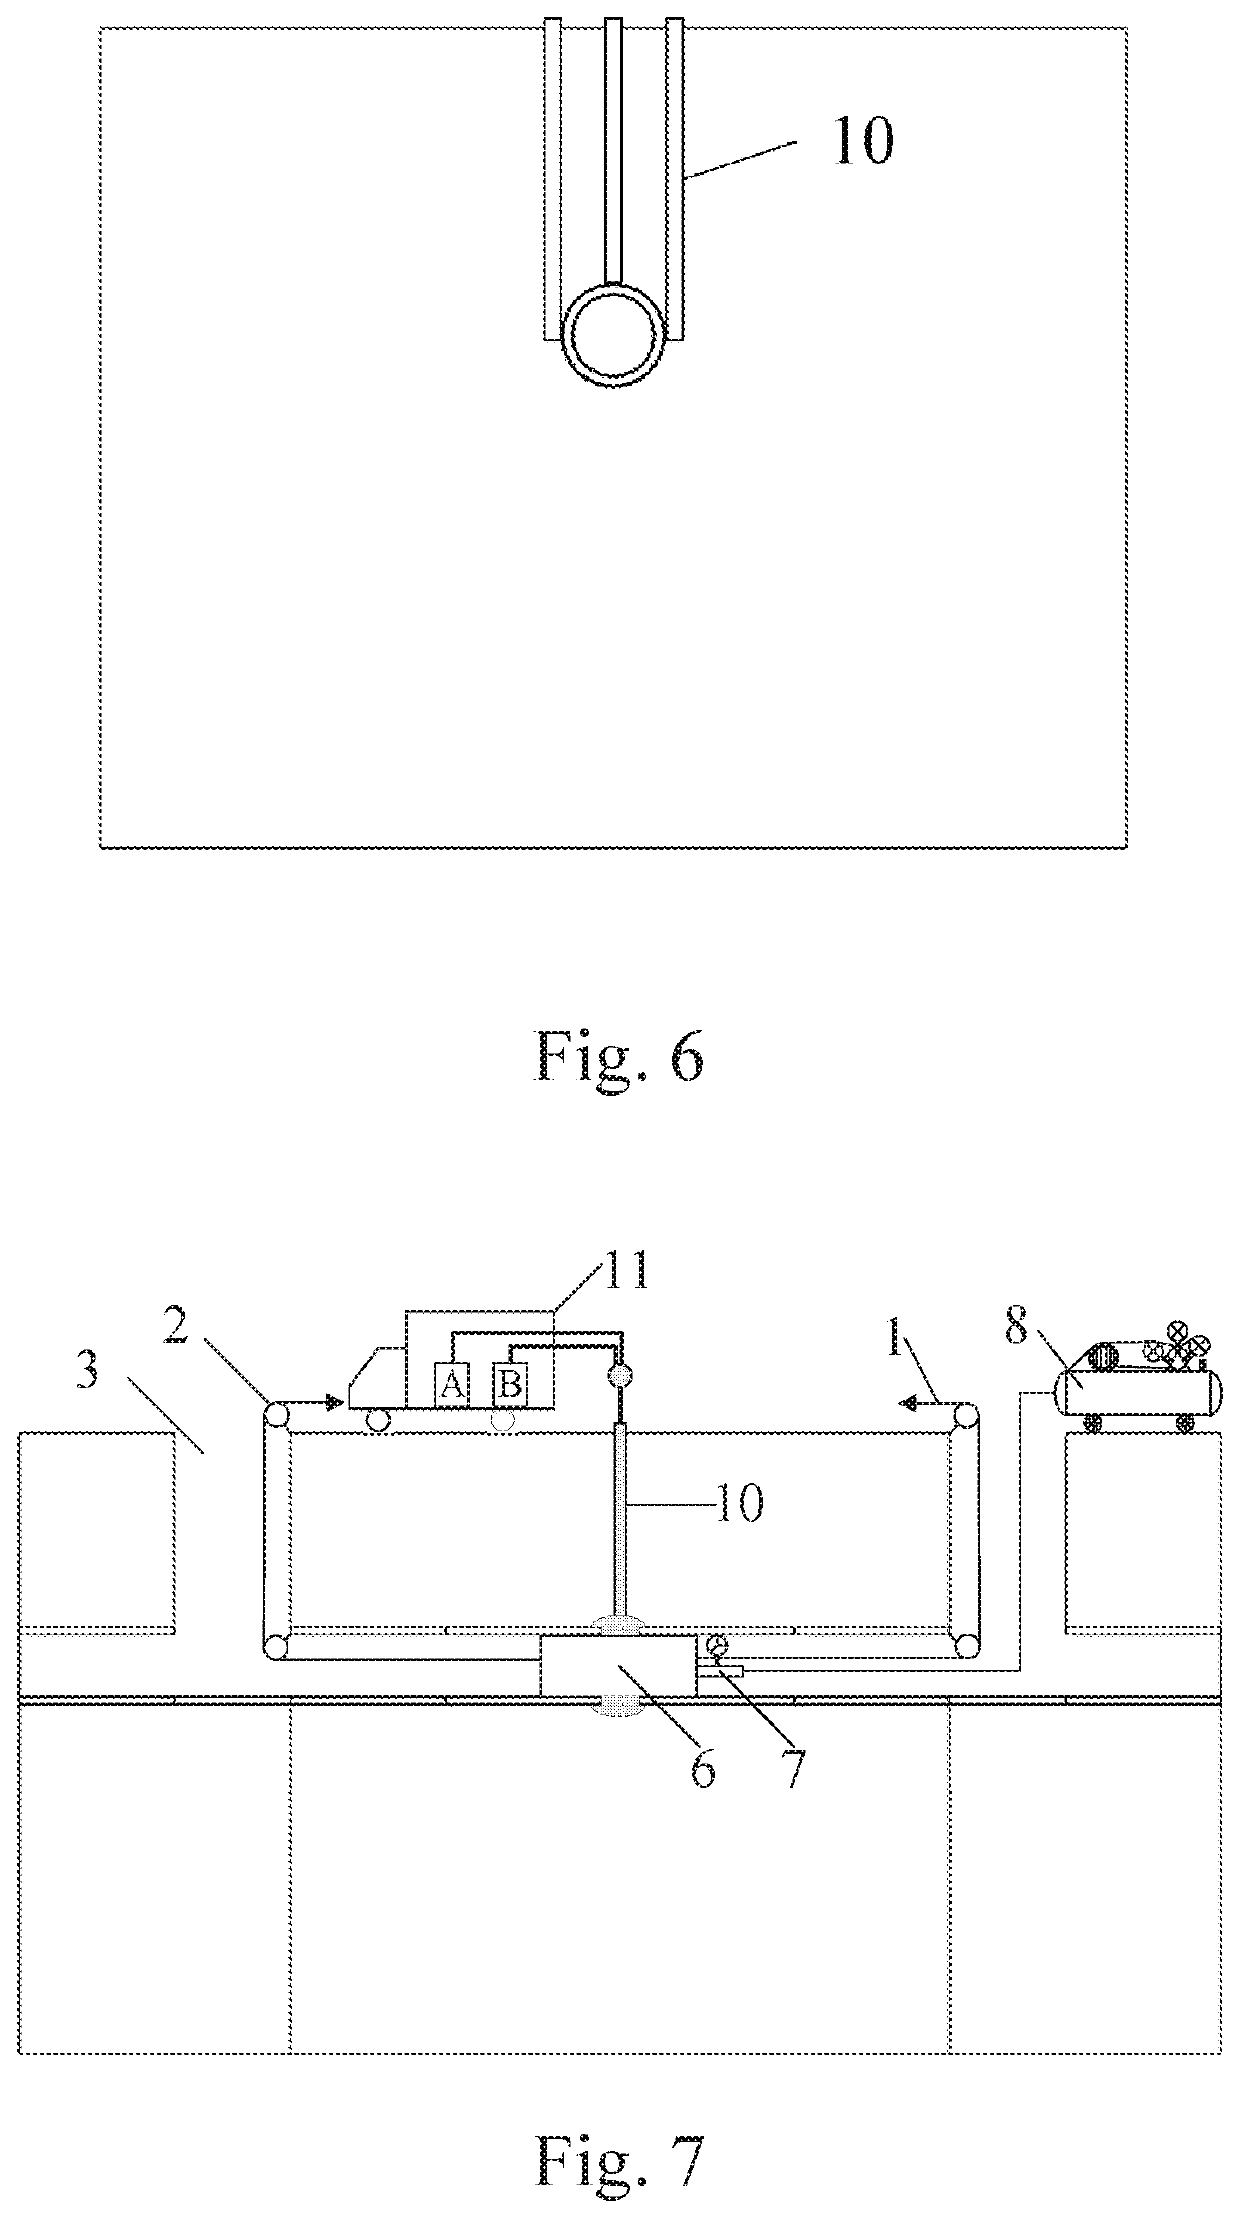 In-service and trenchless repair method for disconnection of drainage pipeline